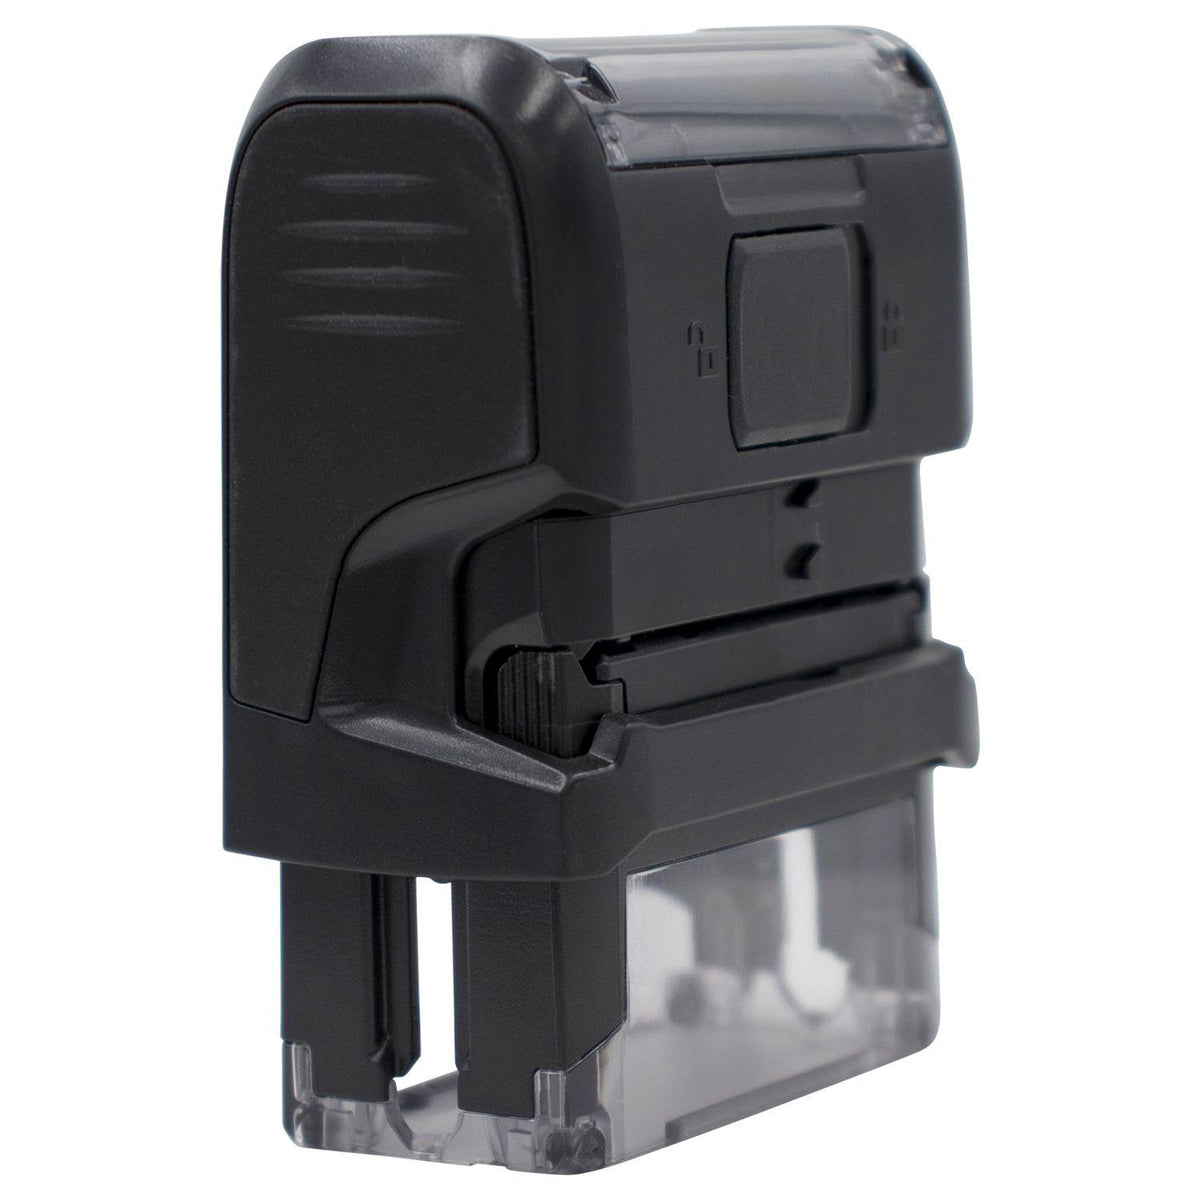 Self Inking Good Stamp - Engineer Seal Stamps - Brand_Trodat, Impression Size_Small, Stamp Type_Self-Inking Stamp, Type of Use_Teacher